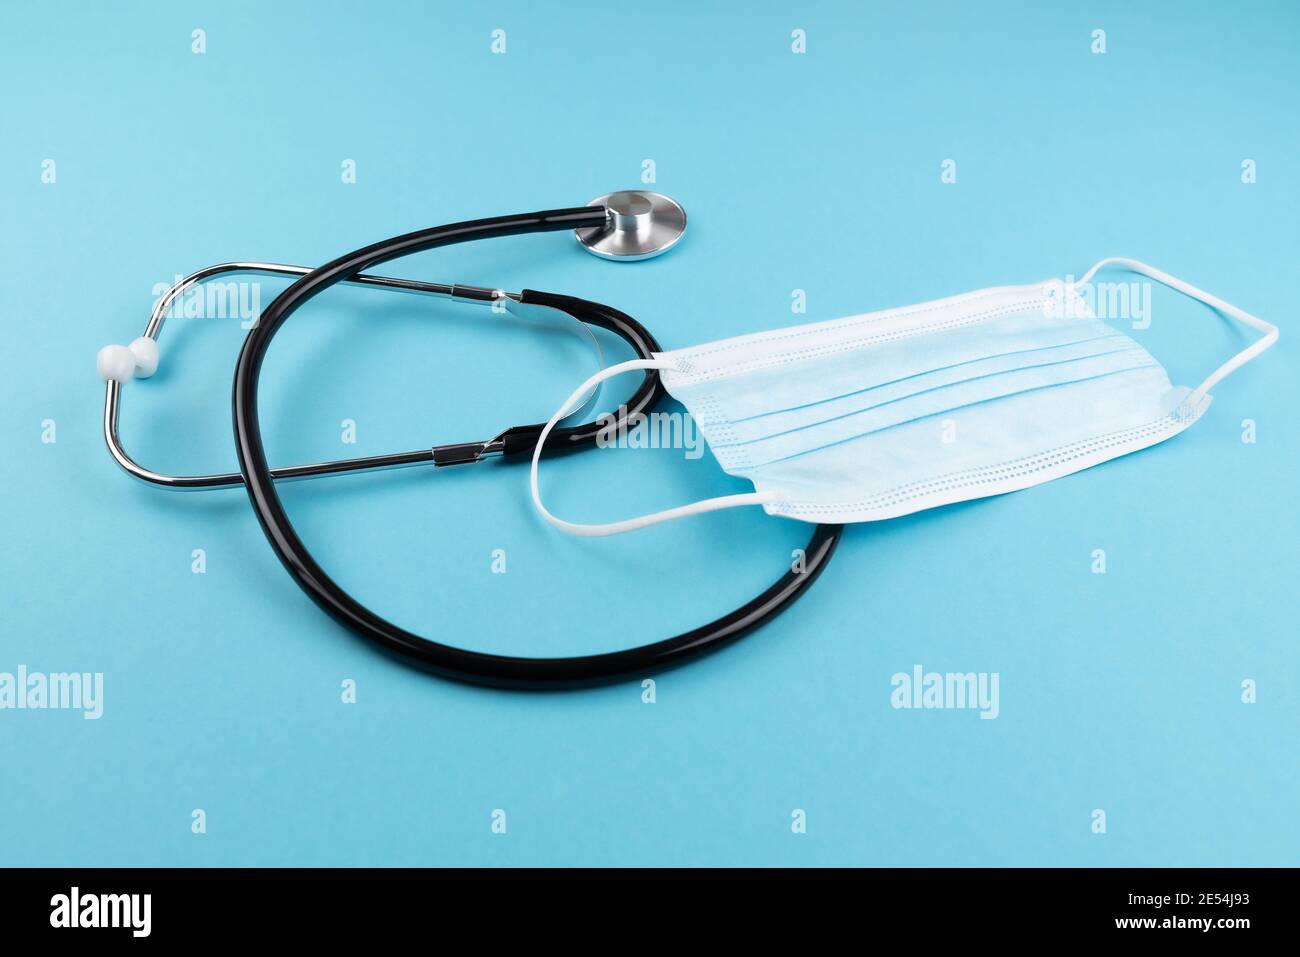 high angle view of stethoscope and surgical mask on blue background, covid-19 coronavirus and respiratory disease concept Stock Photo